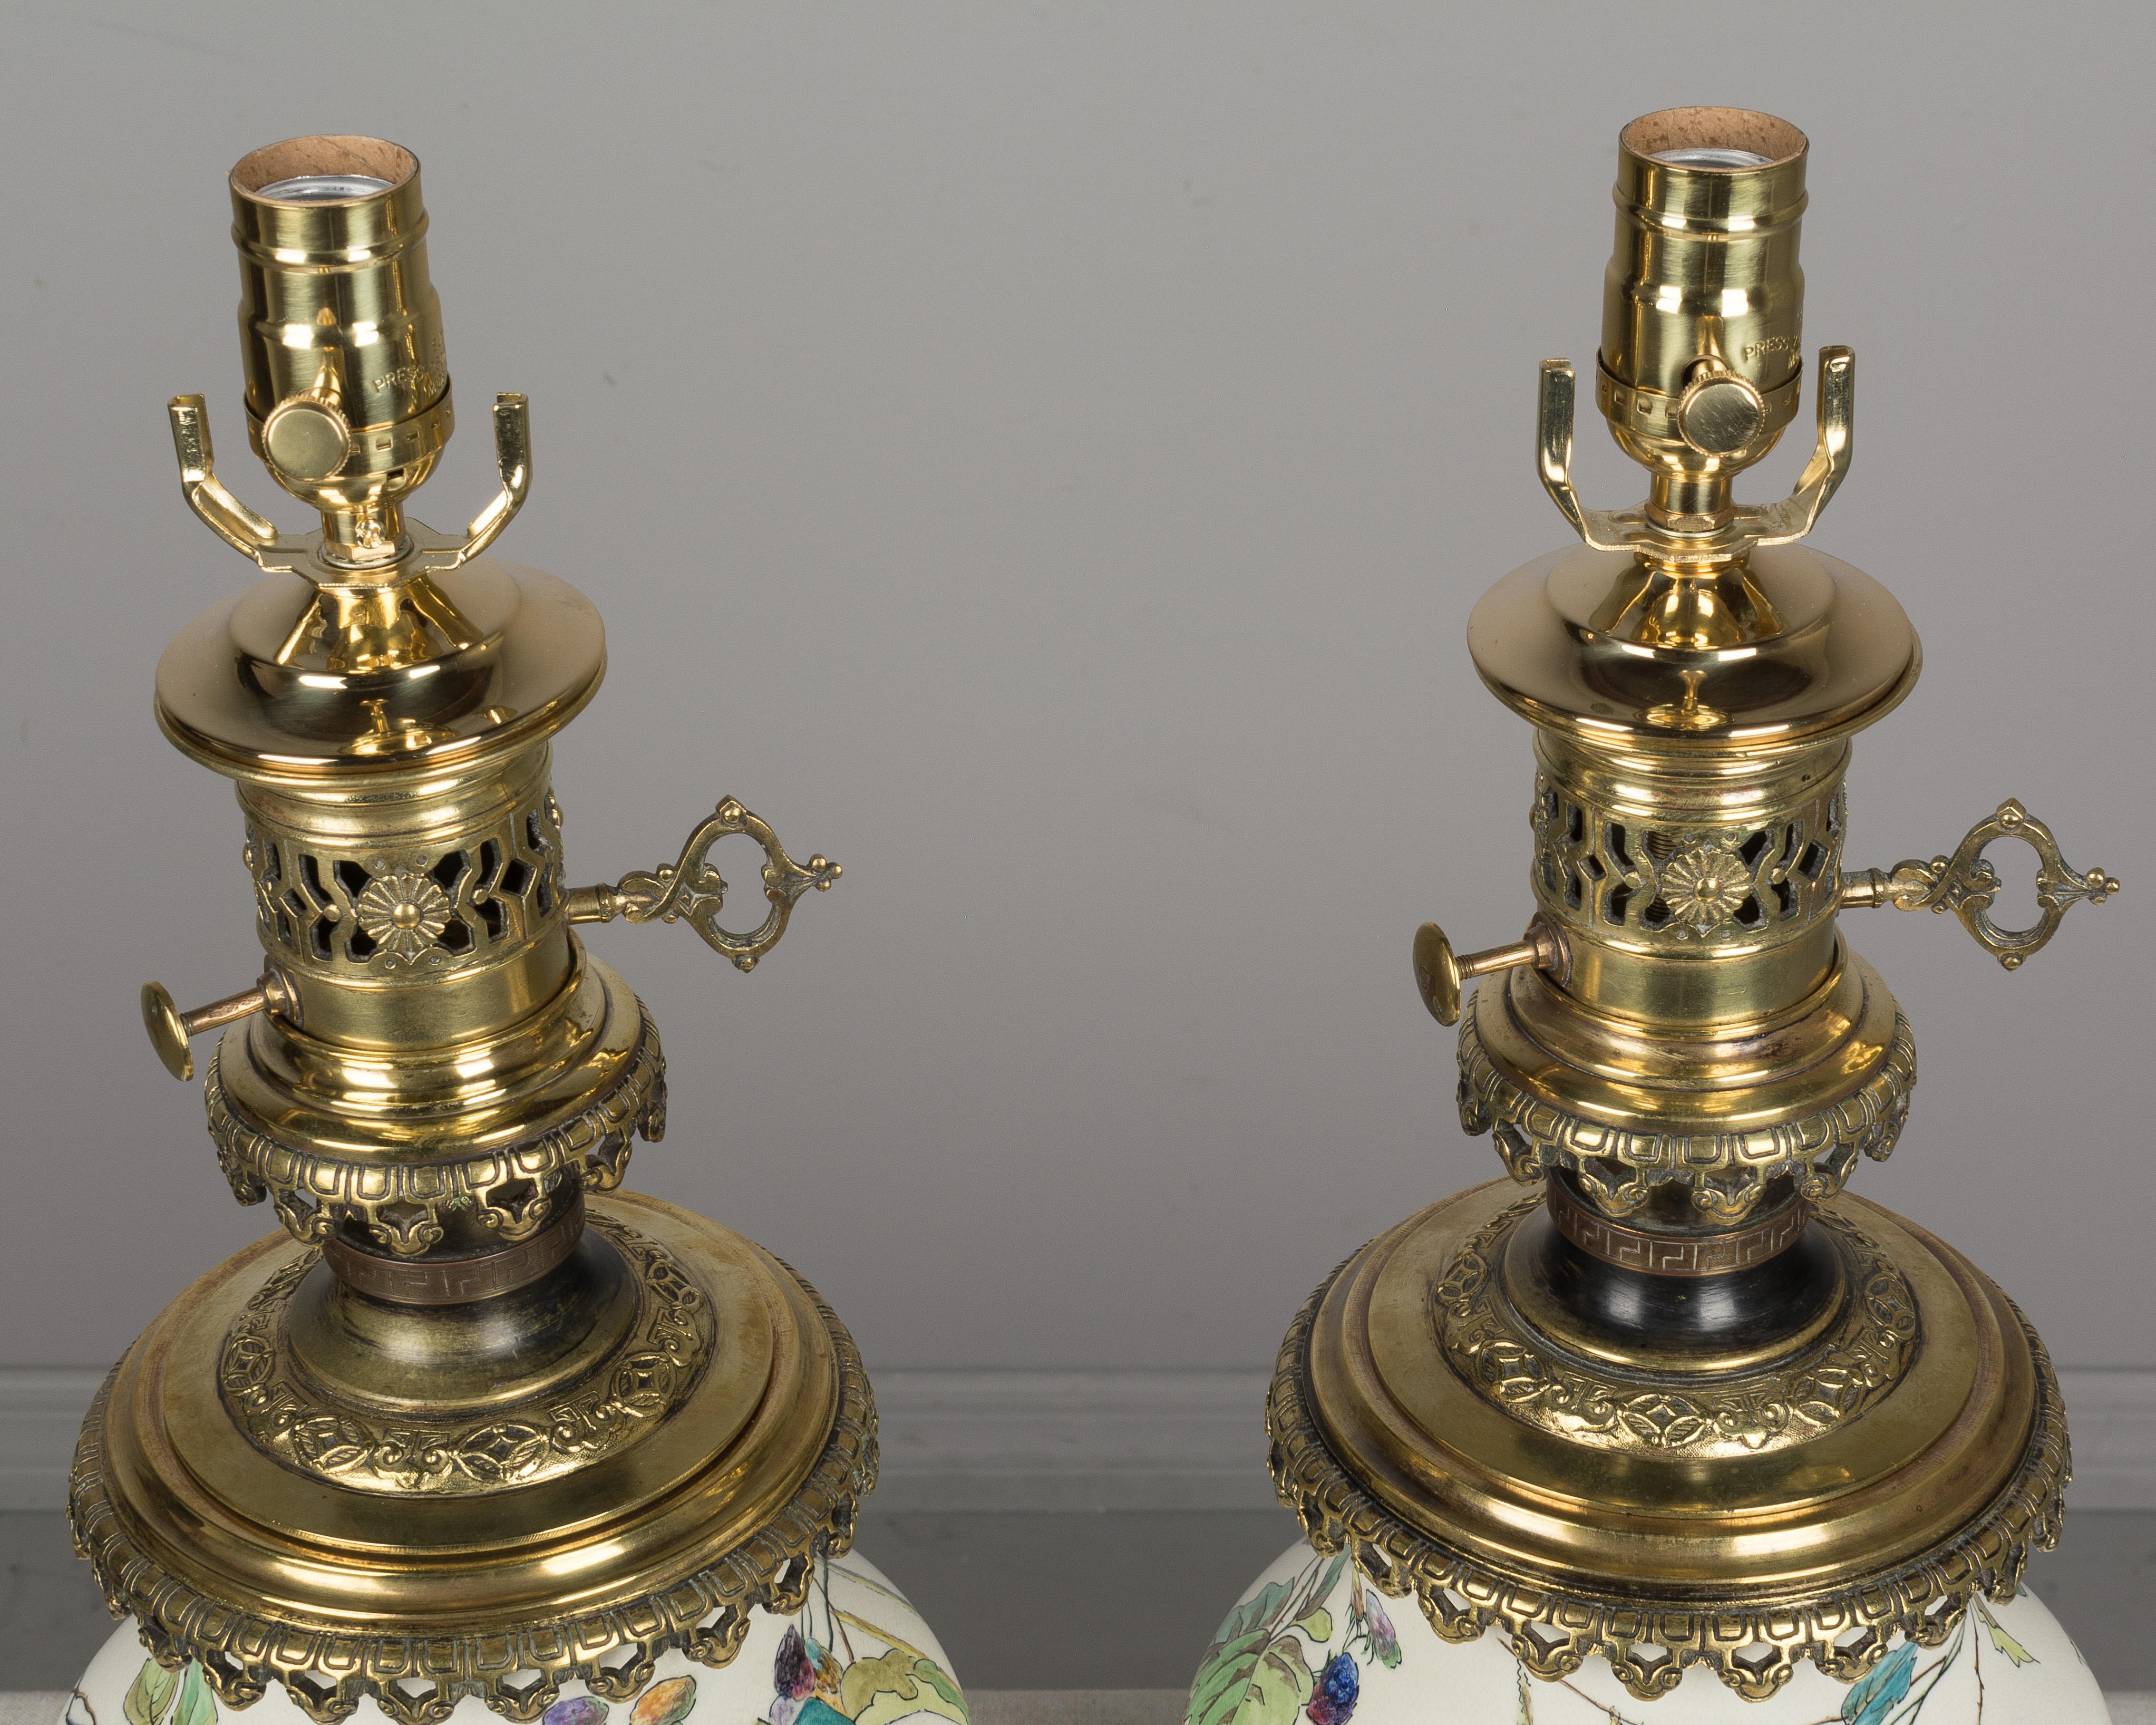 Pair of Bronze-Mounted Sevres Ceramic Lamps in the Manner of Theodore Deck 2